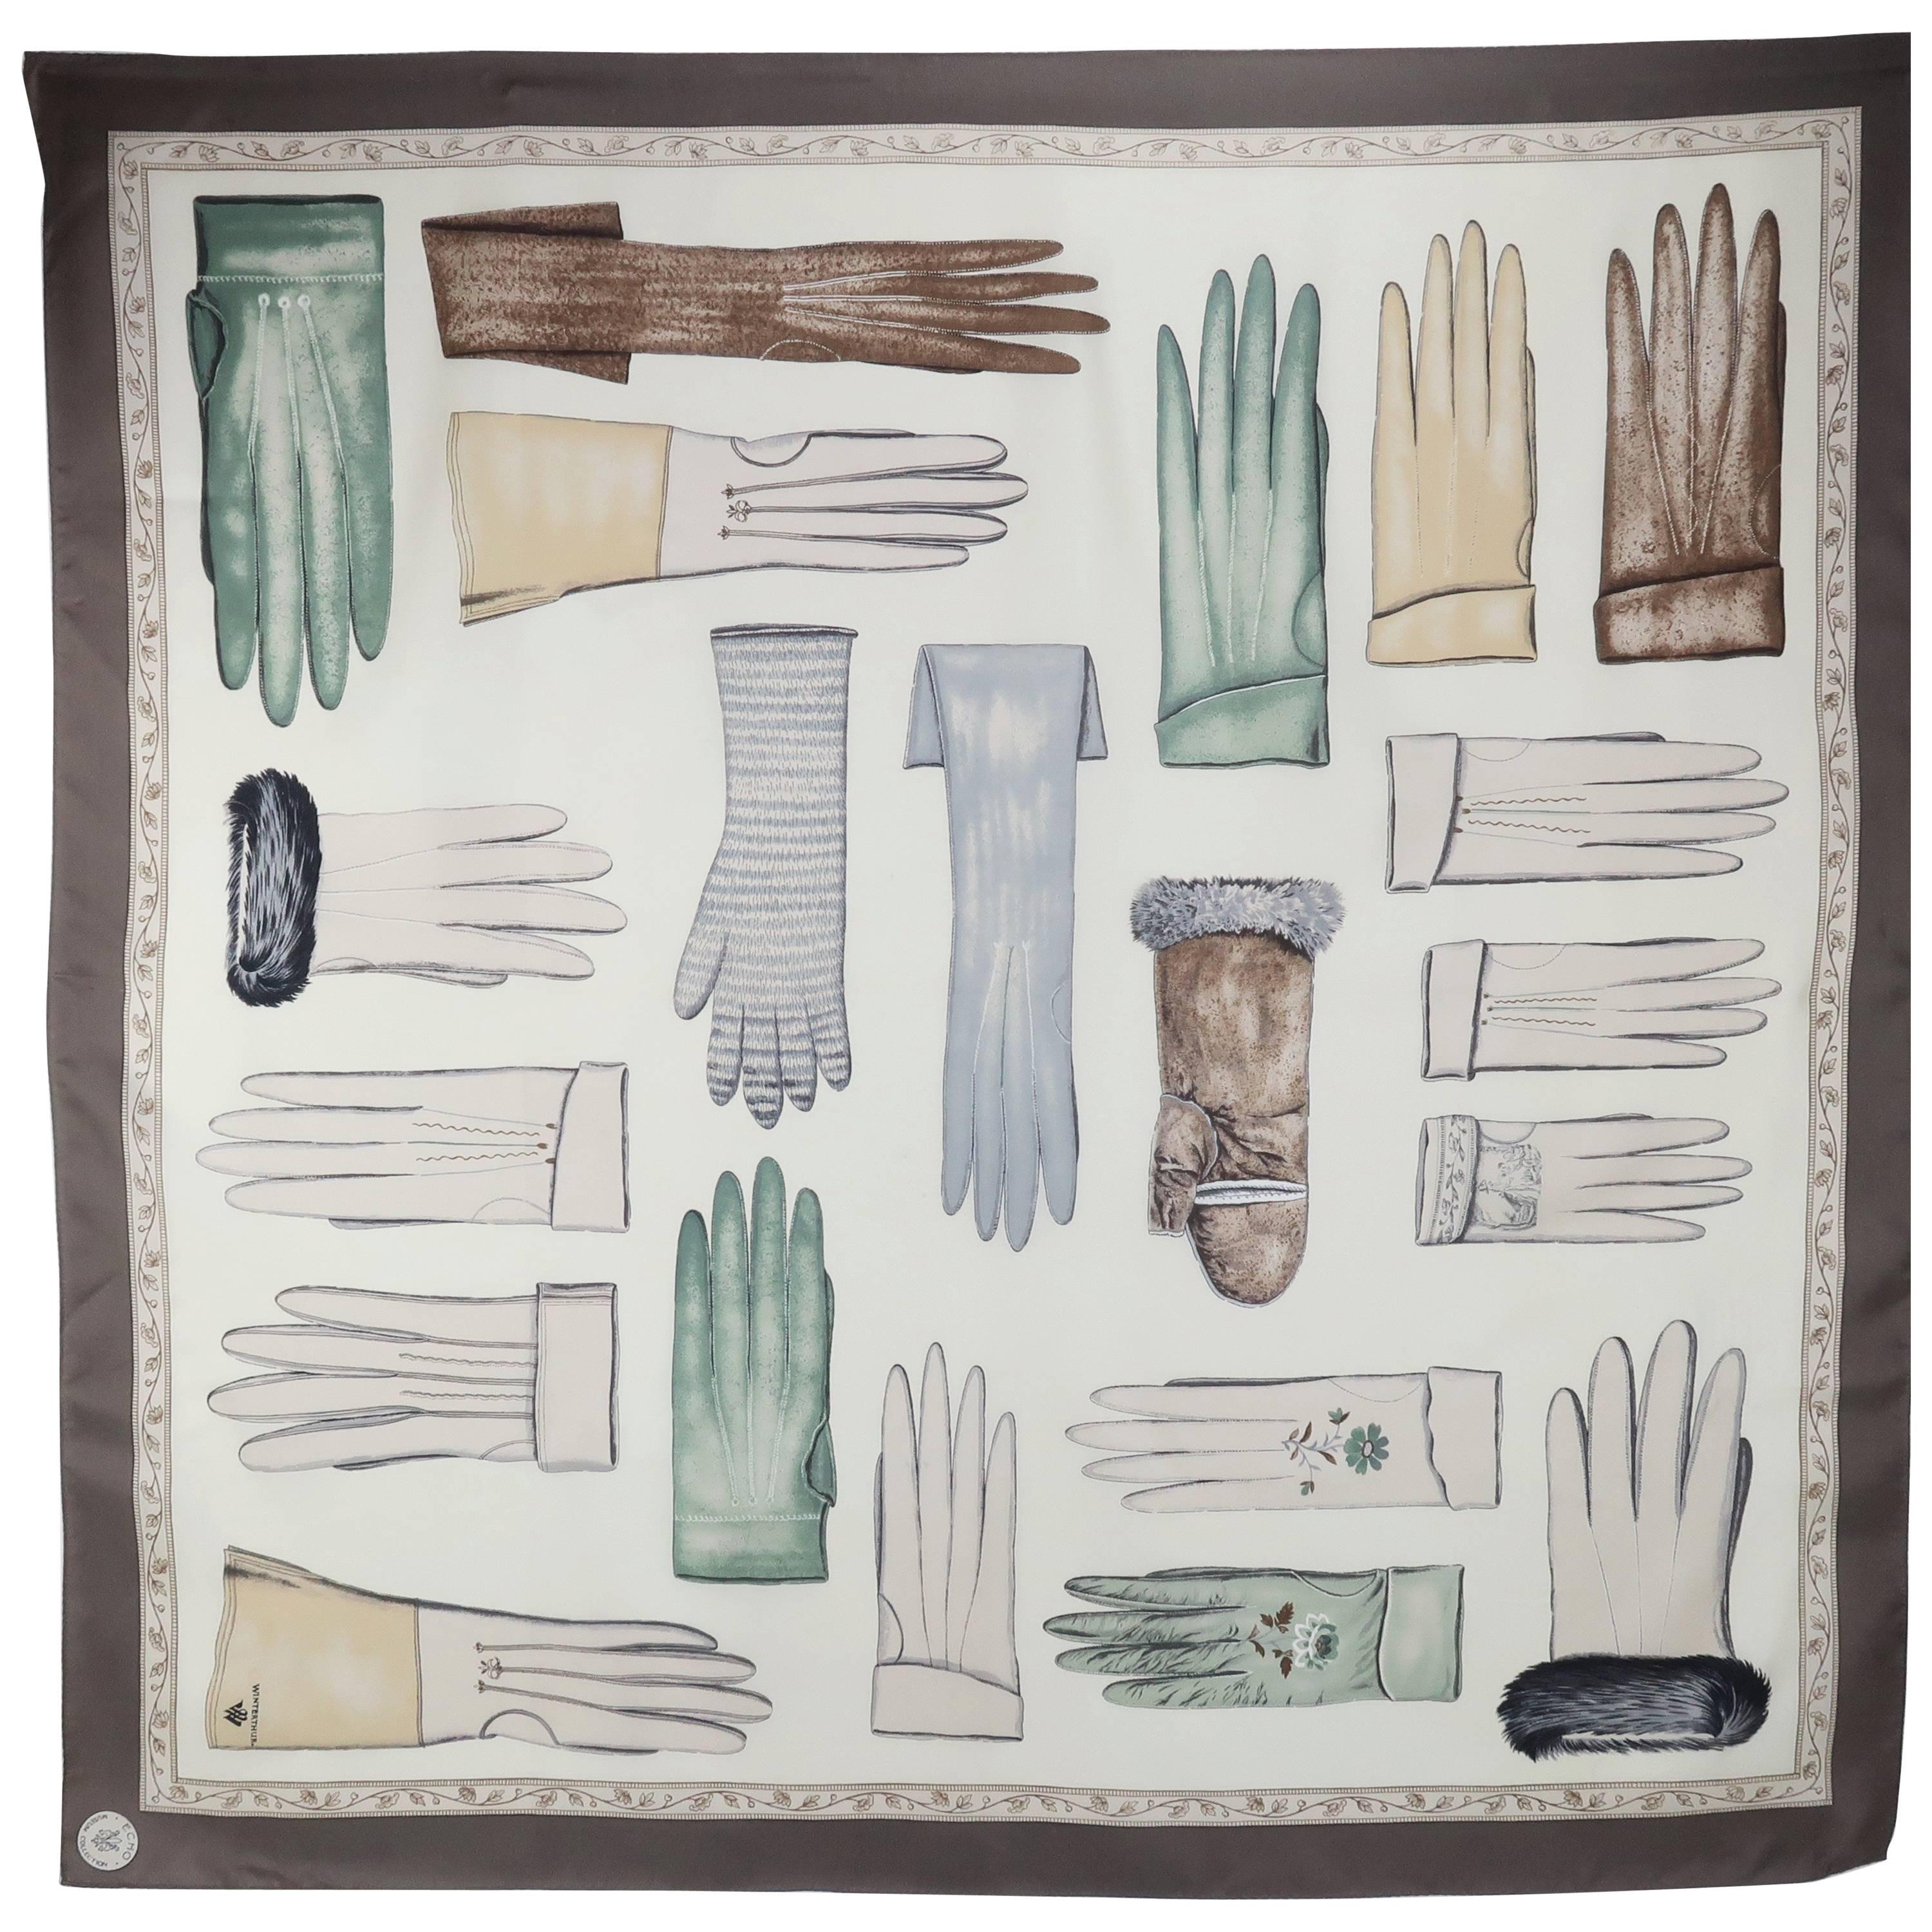 Echo Museum Collection Silk Scarf With Trompe L’Oeil Gloves